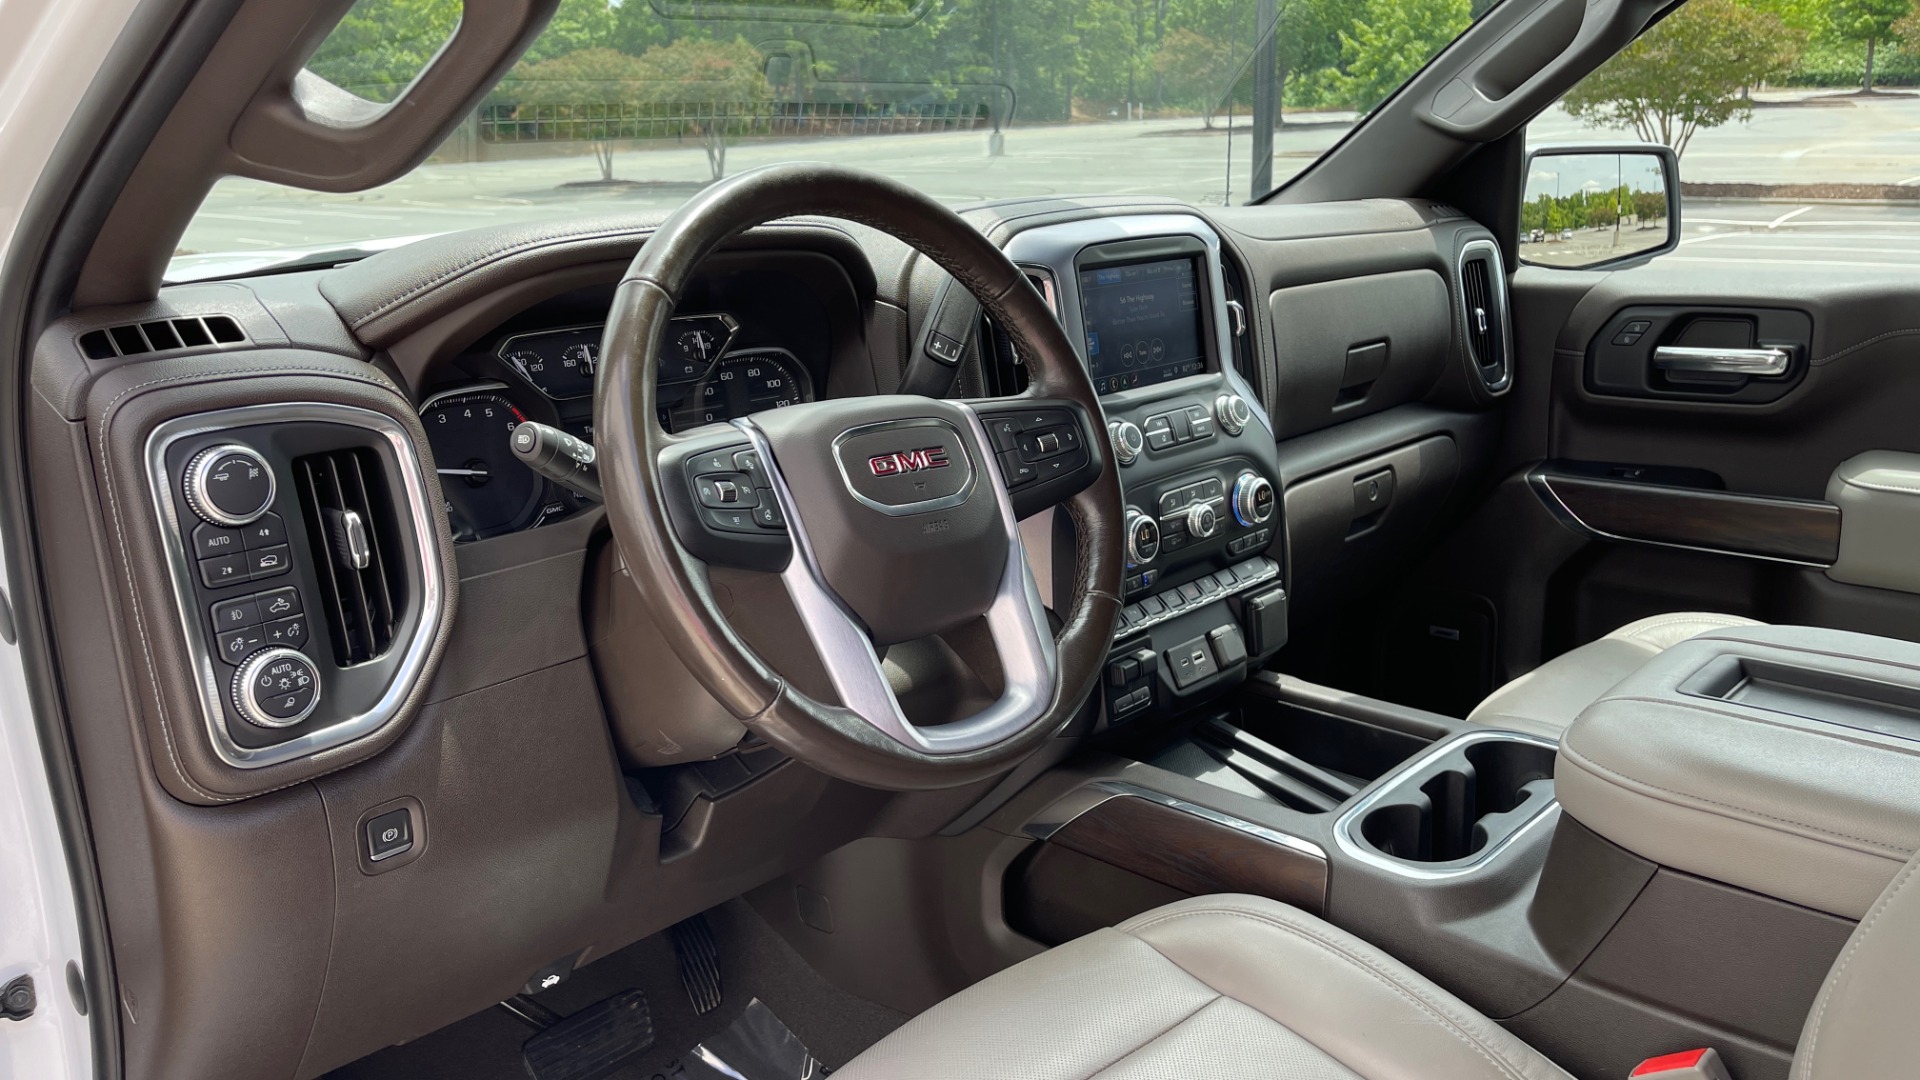 Used 2019 GMC SIERRA 1500 SLT 4X4 CREWCAB / 5.3L V8 / 8-SPD AUTO / NAV / BOSE / REARVIEW for sale Sold at Formula Imports in Charlotte NC 28227 37